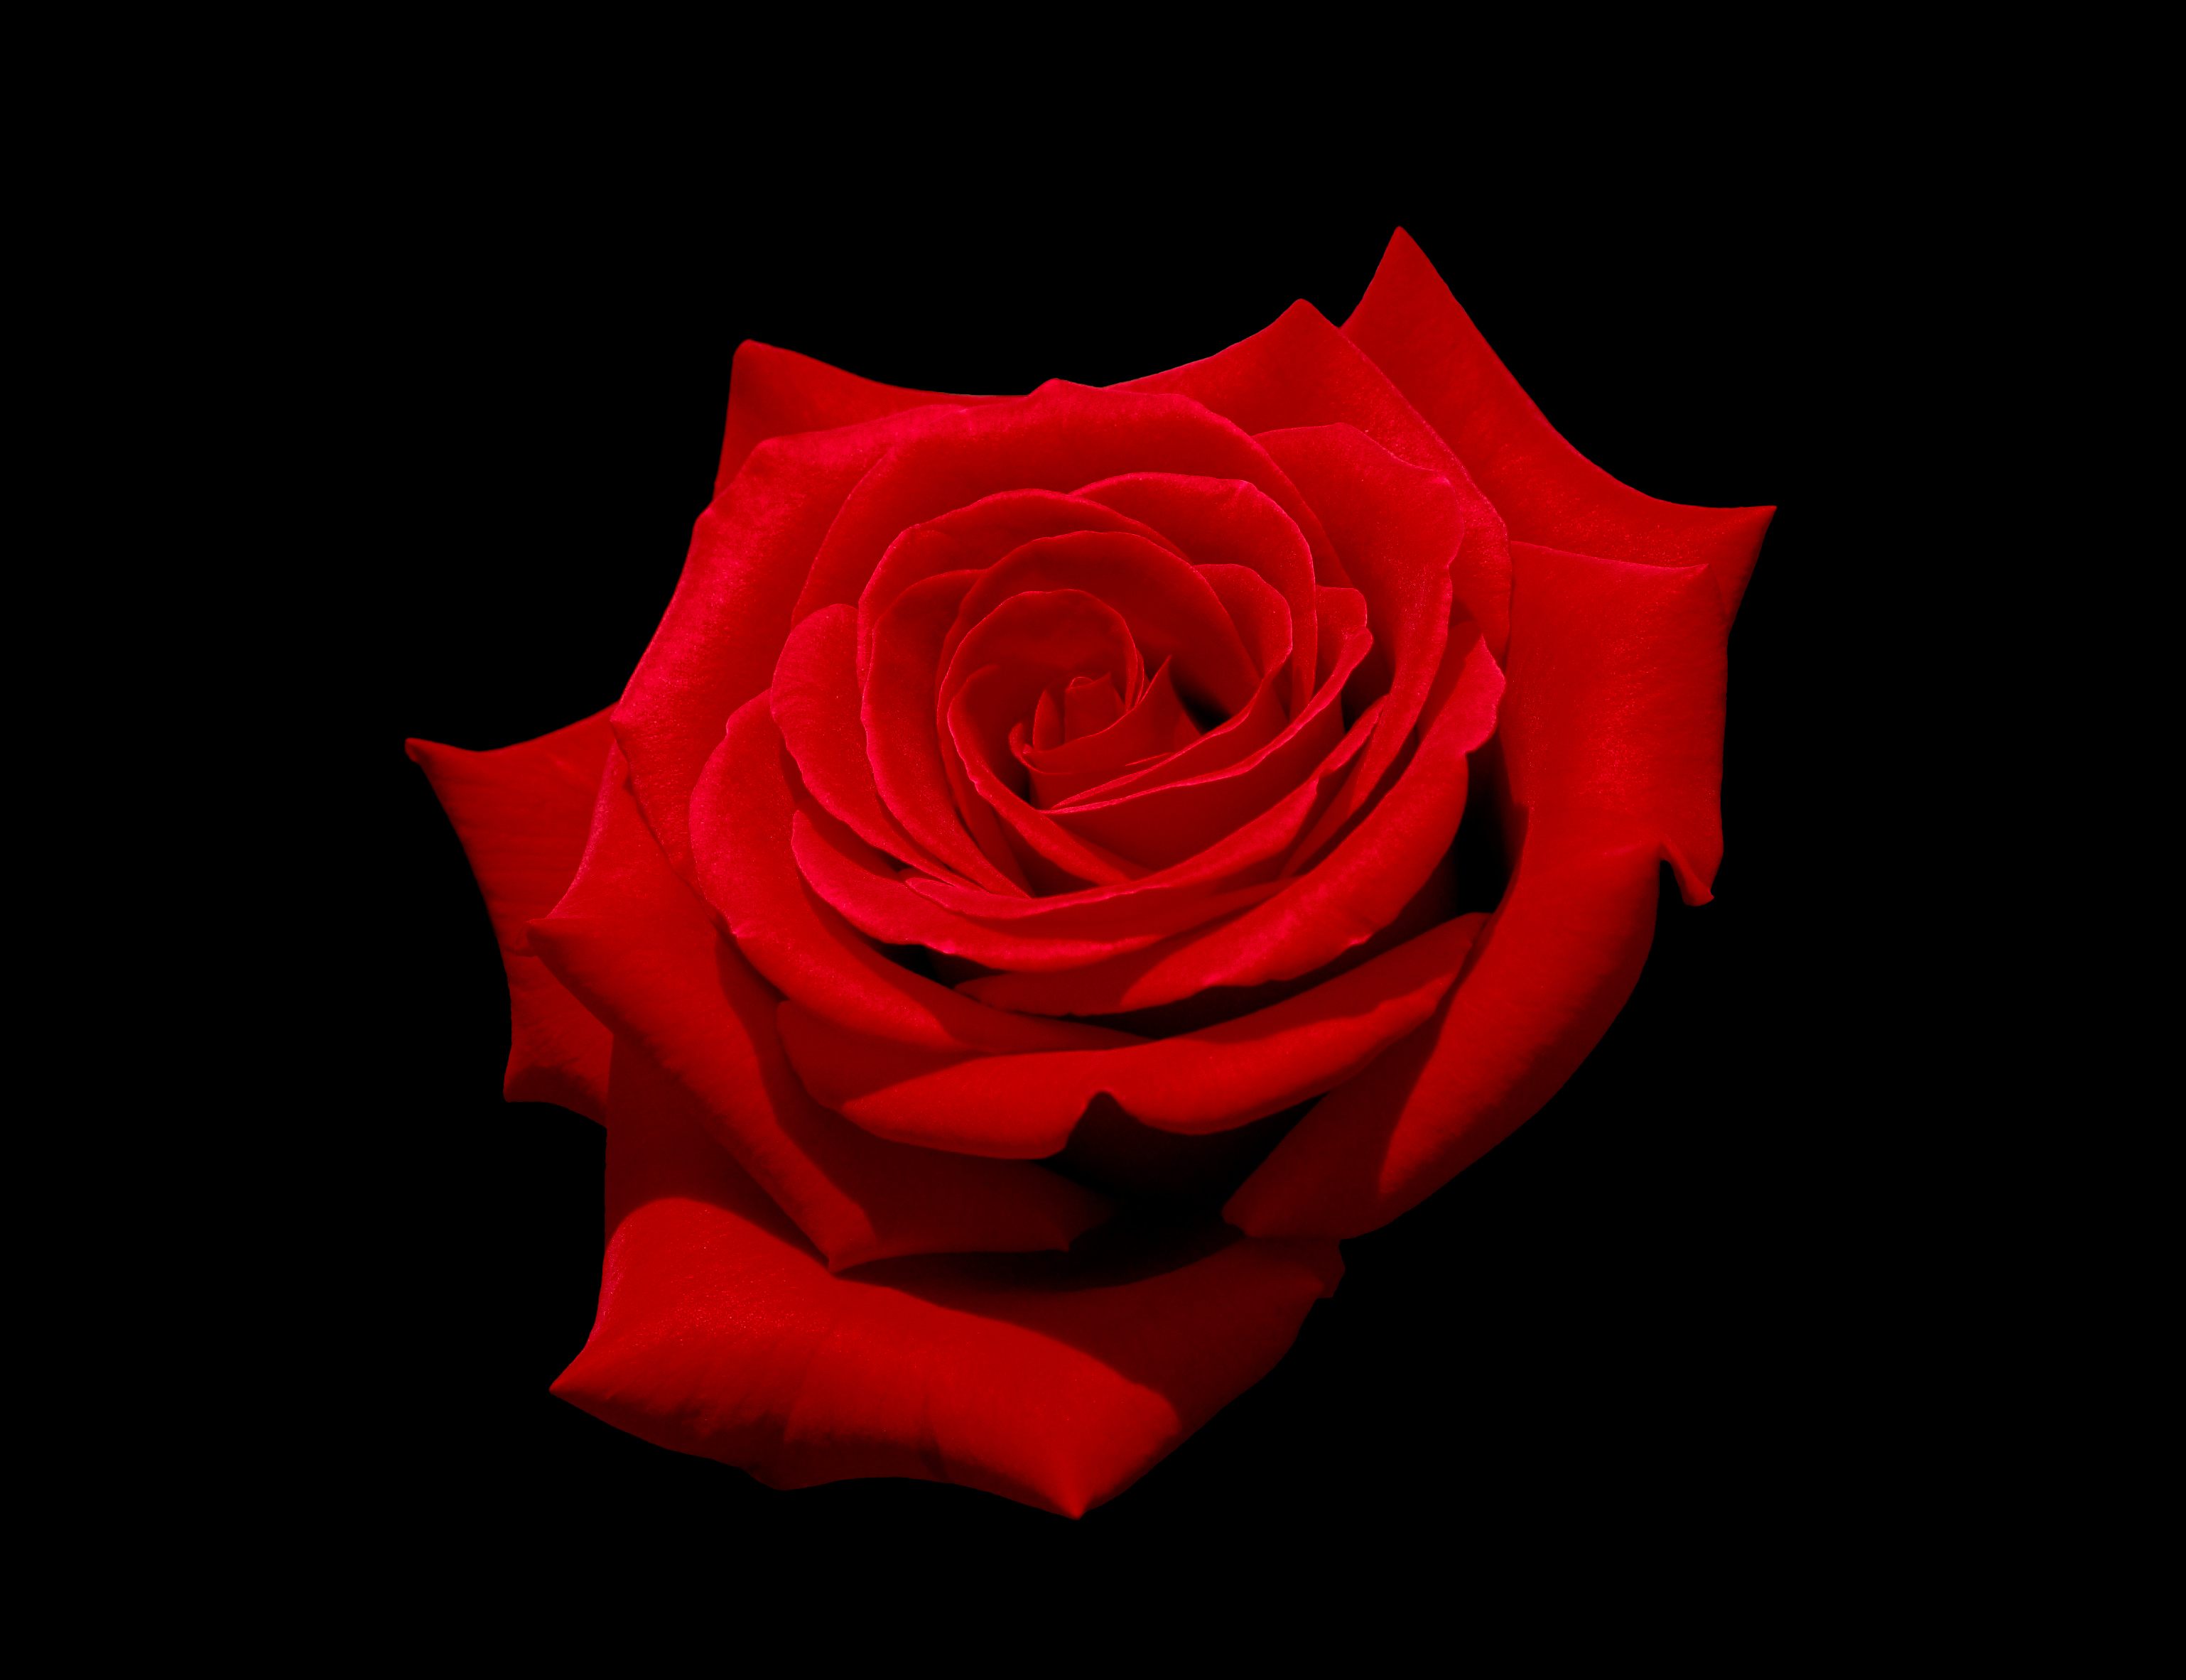 File Red Rose With Black Background Jpg Wikimedia Mons